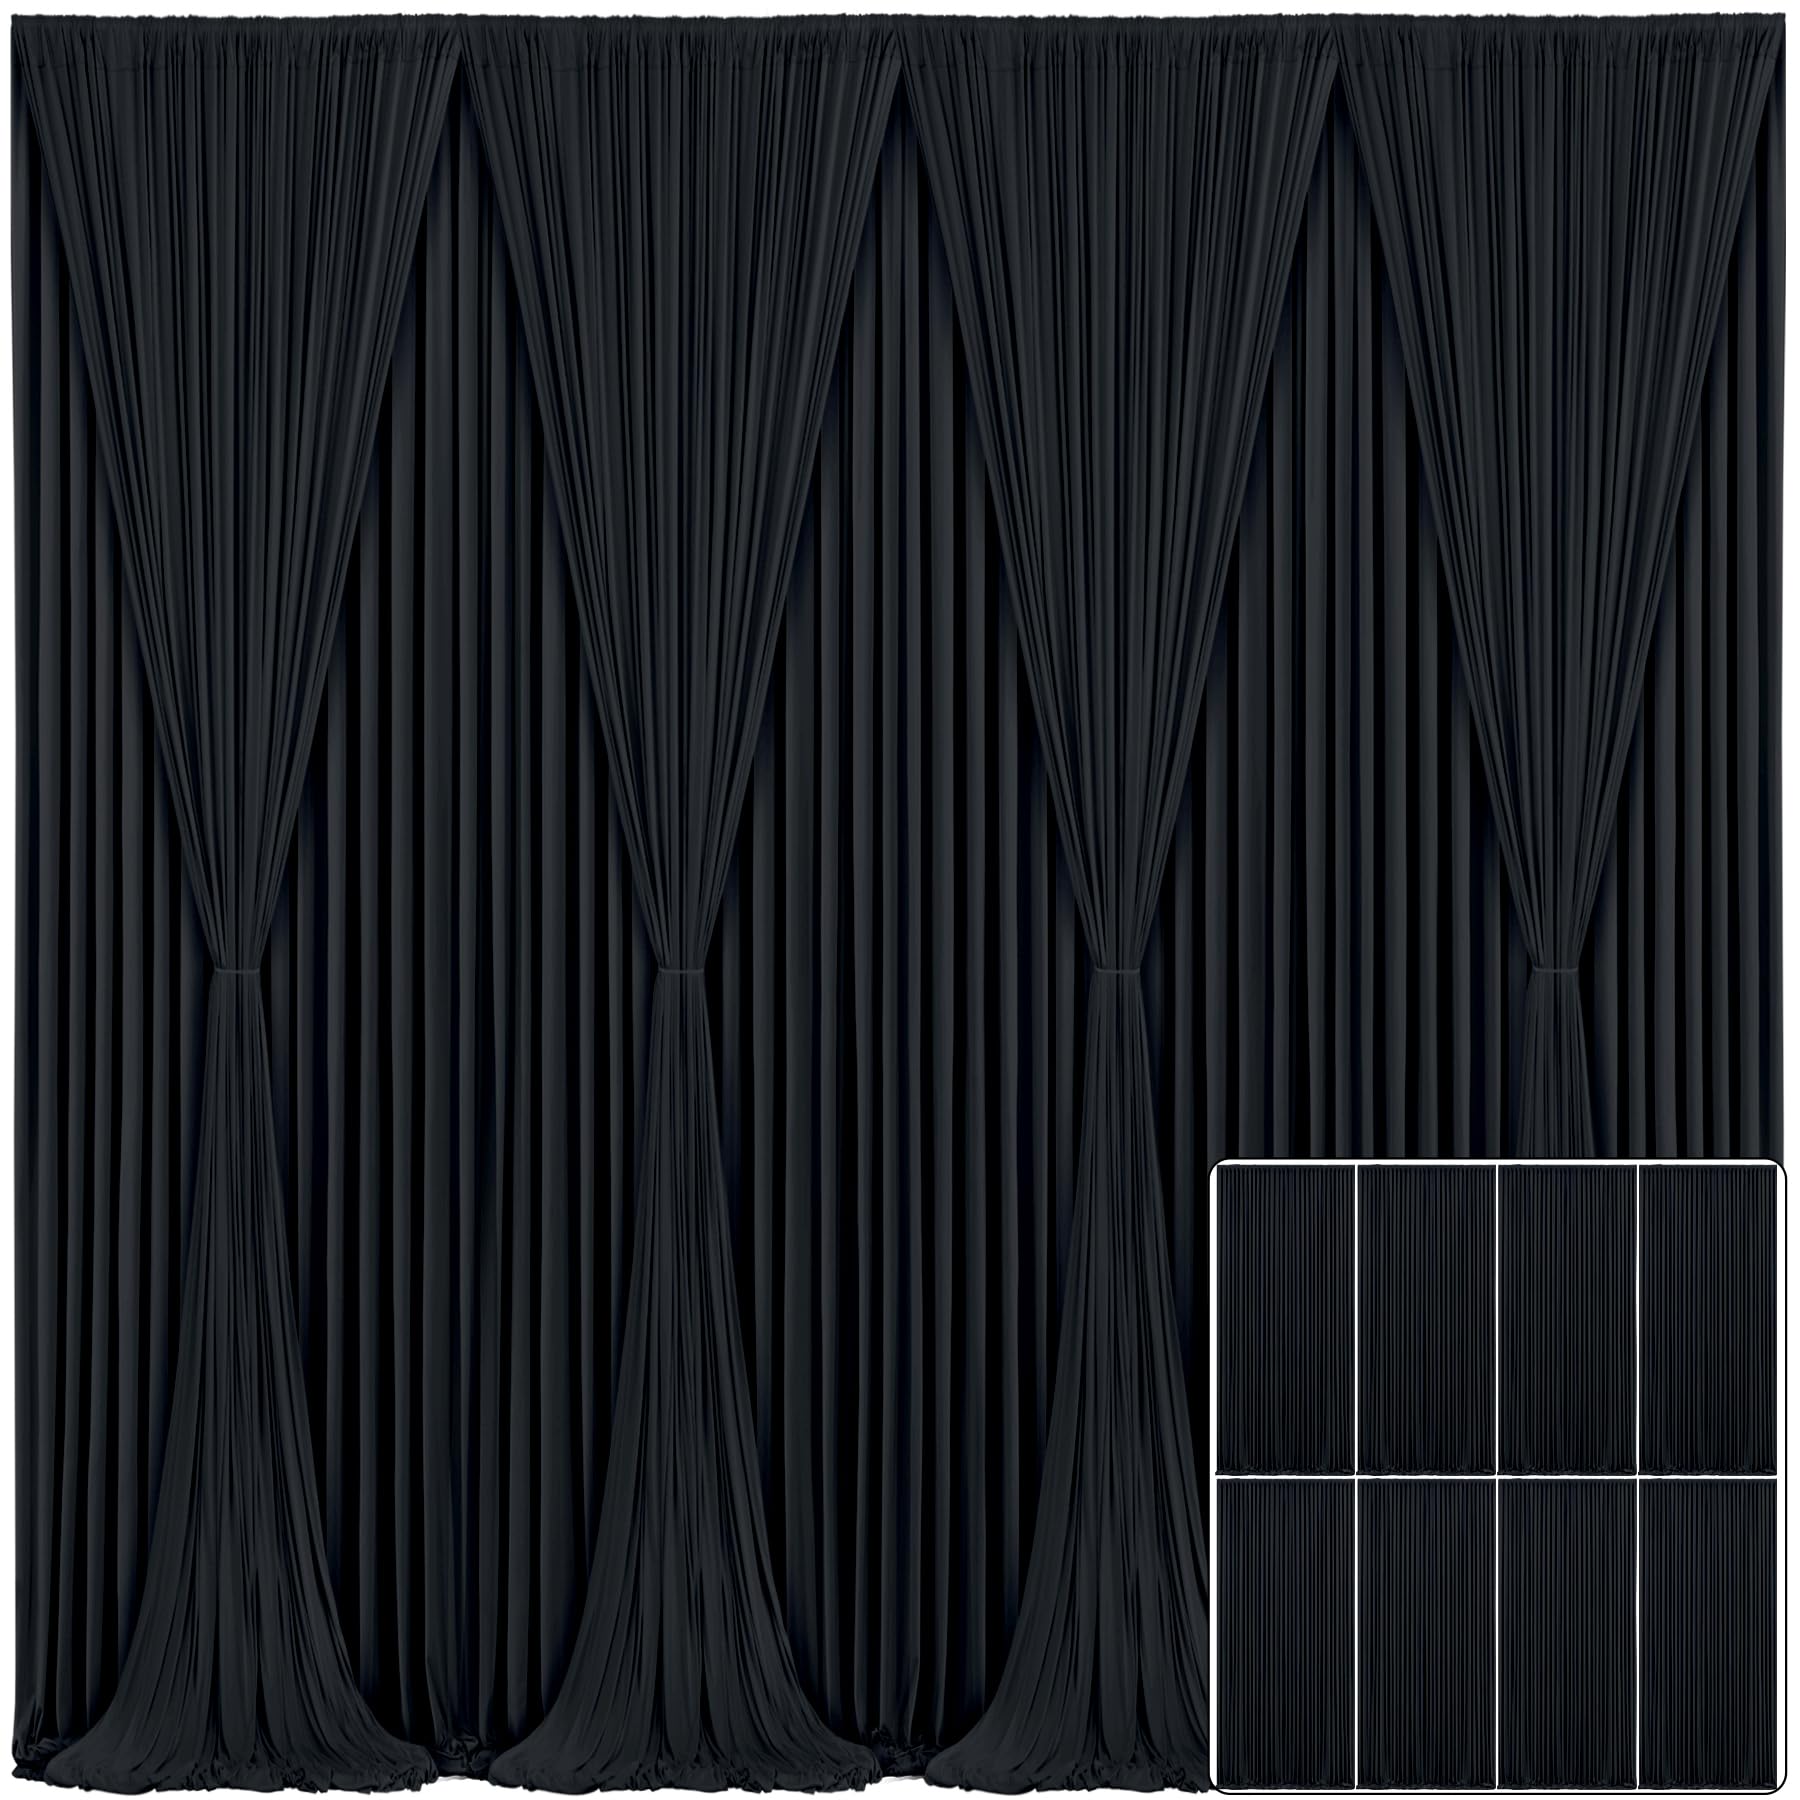 8 Panels Black Backdrop Curtain for Parties Wrinkle Free Black Photo Curtains Backdrop Drapes Fabric Decoration for Birthday Party Wedding 40ft(W) x 10ft(H)